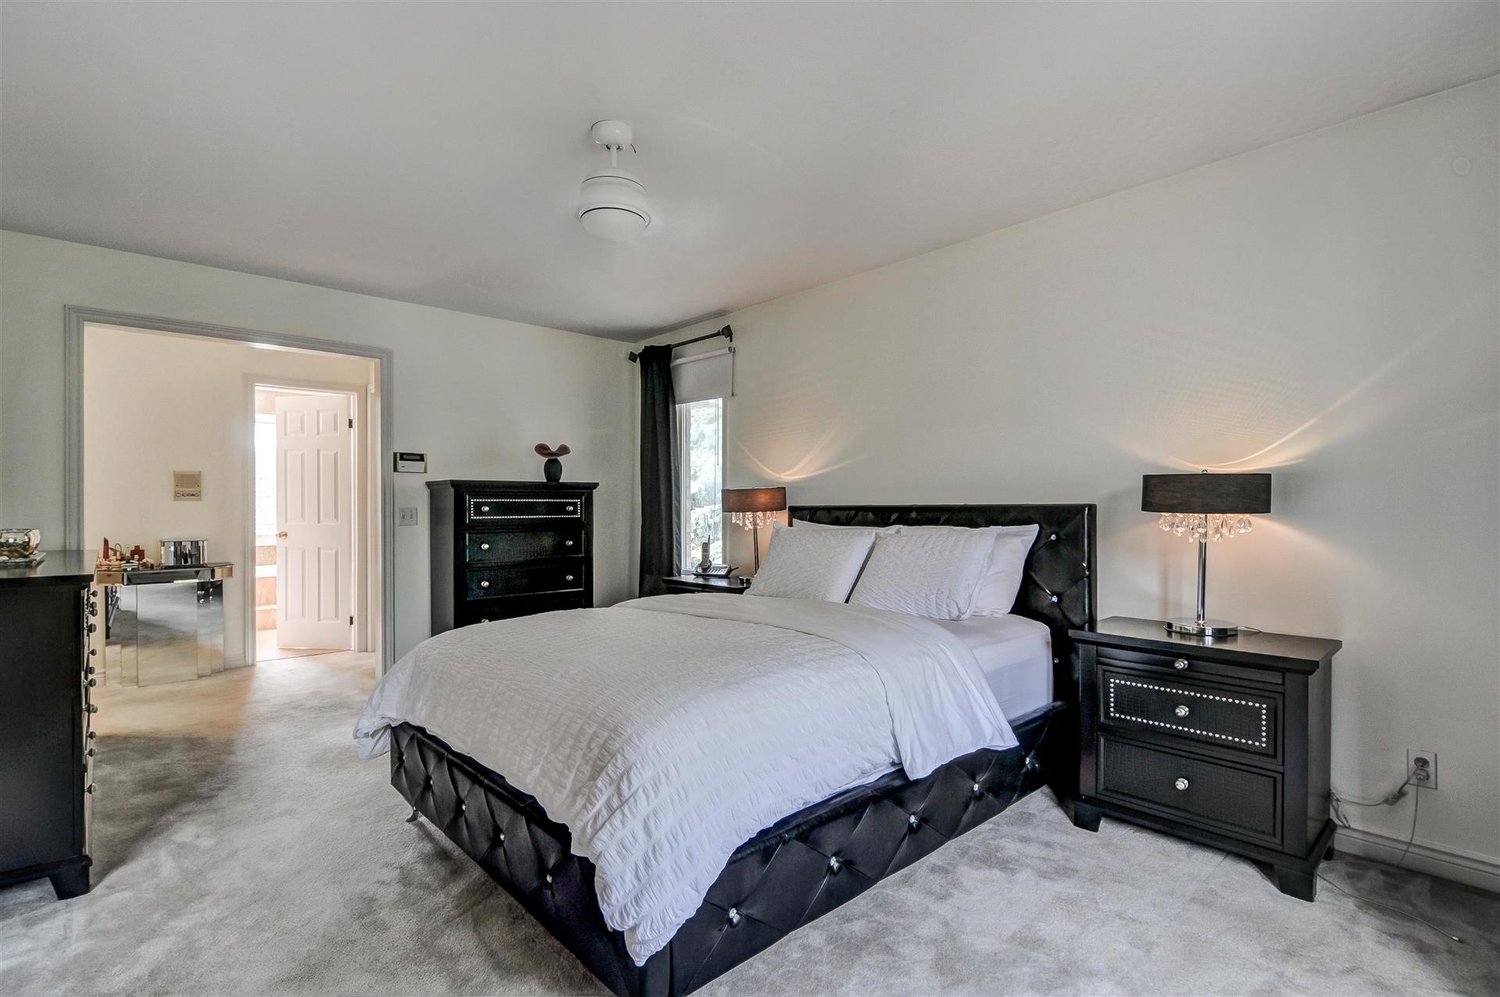 Christopher Haggarty Home Staging & Design